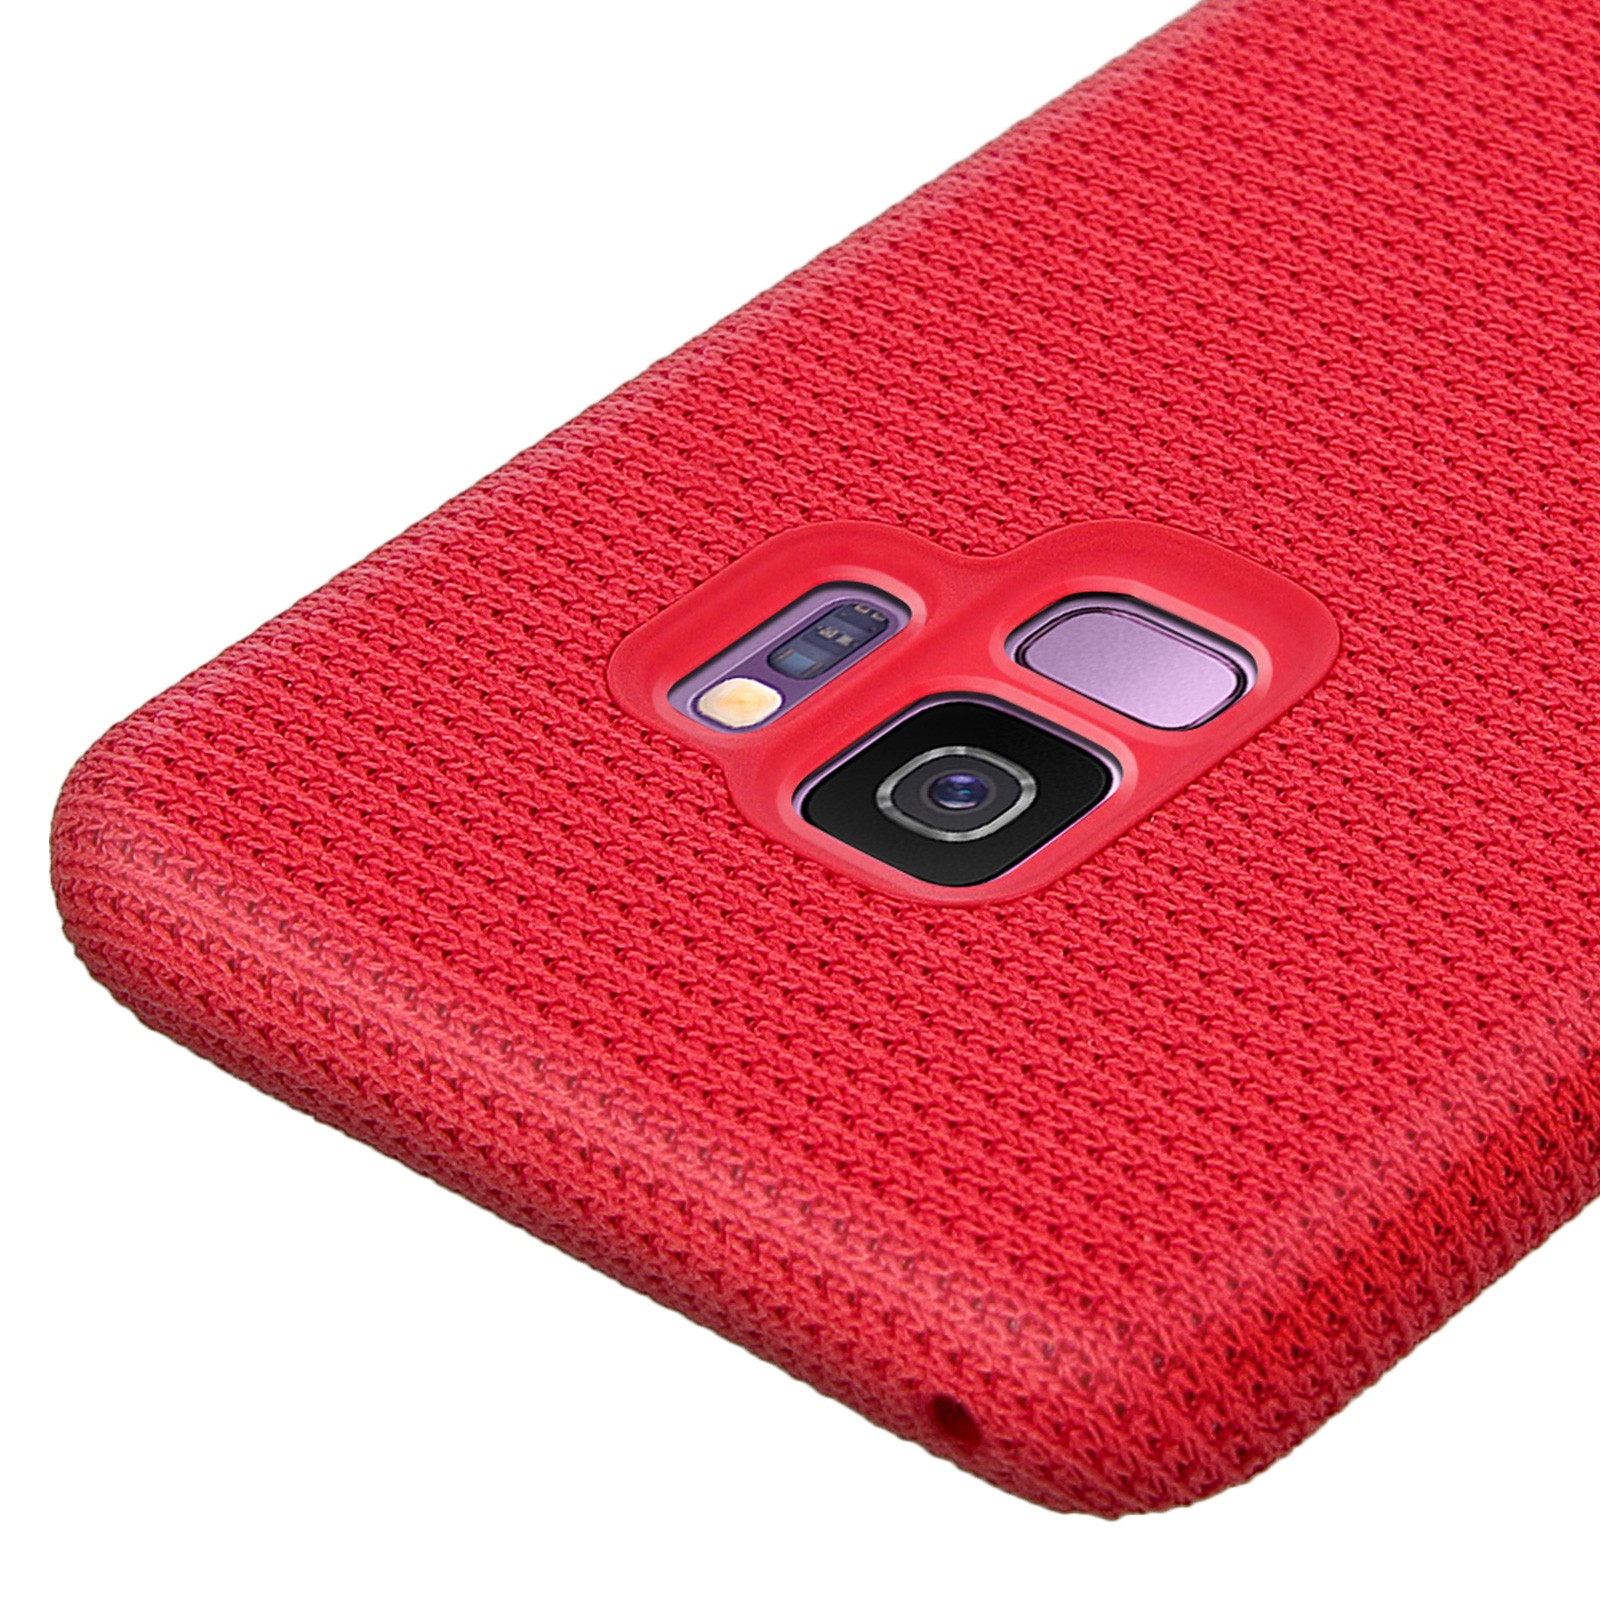 S9, Hyperknit Case Cover Bookcover, Angabe SAMSUNG Galaxy Samsung, Galaxy - (Red), for Keine S9